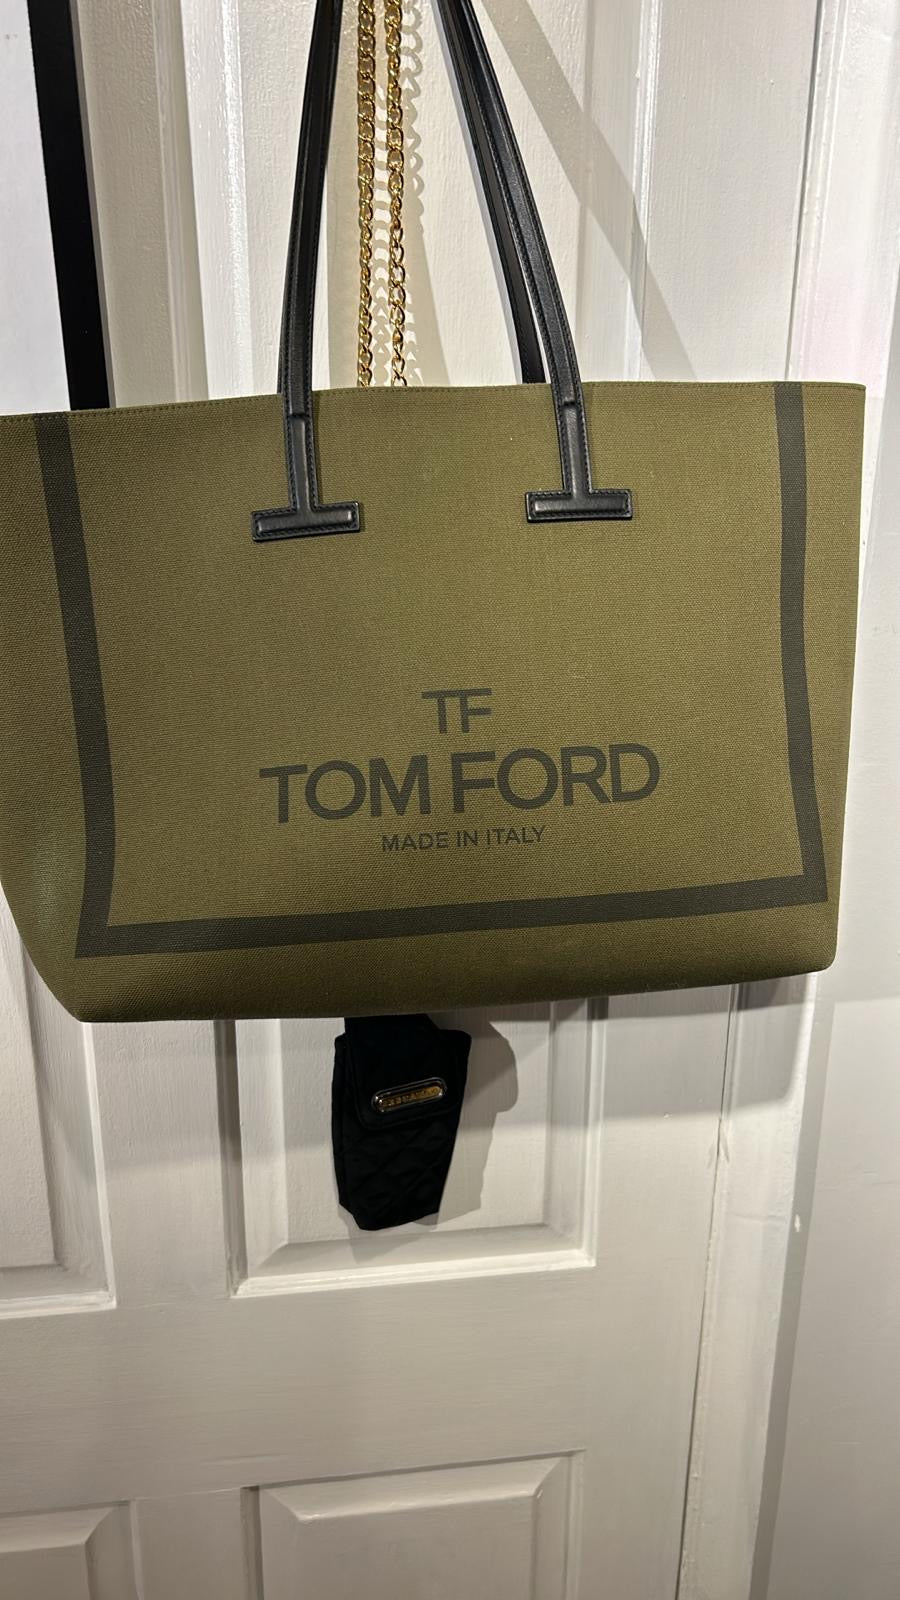 Tom ford canvas tote bag